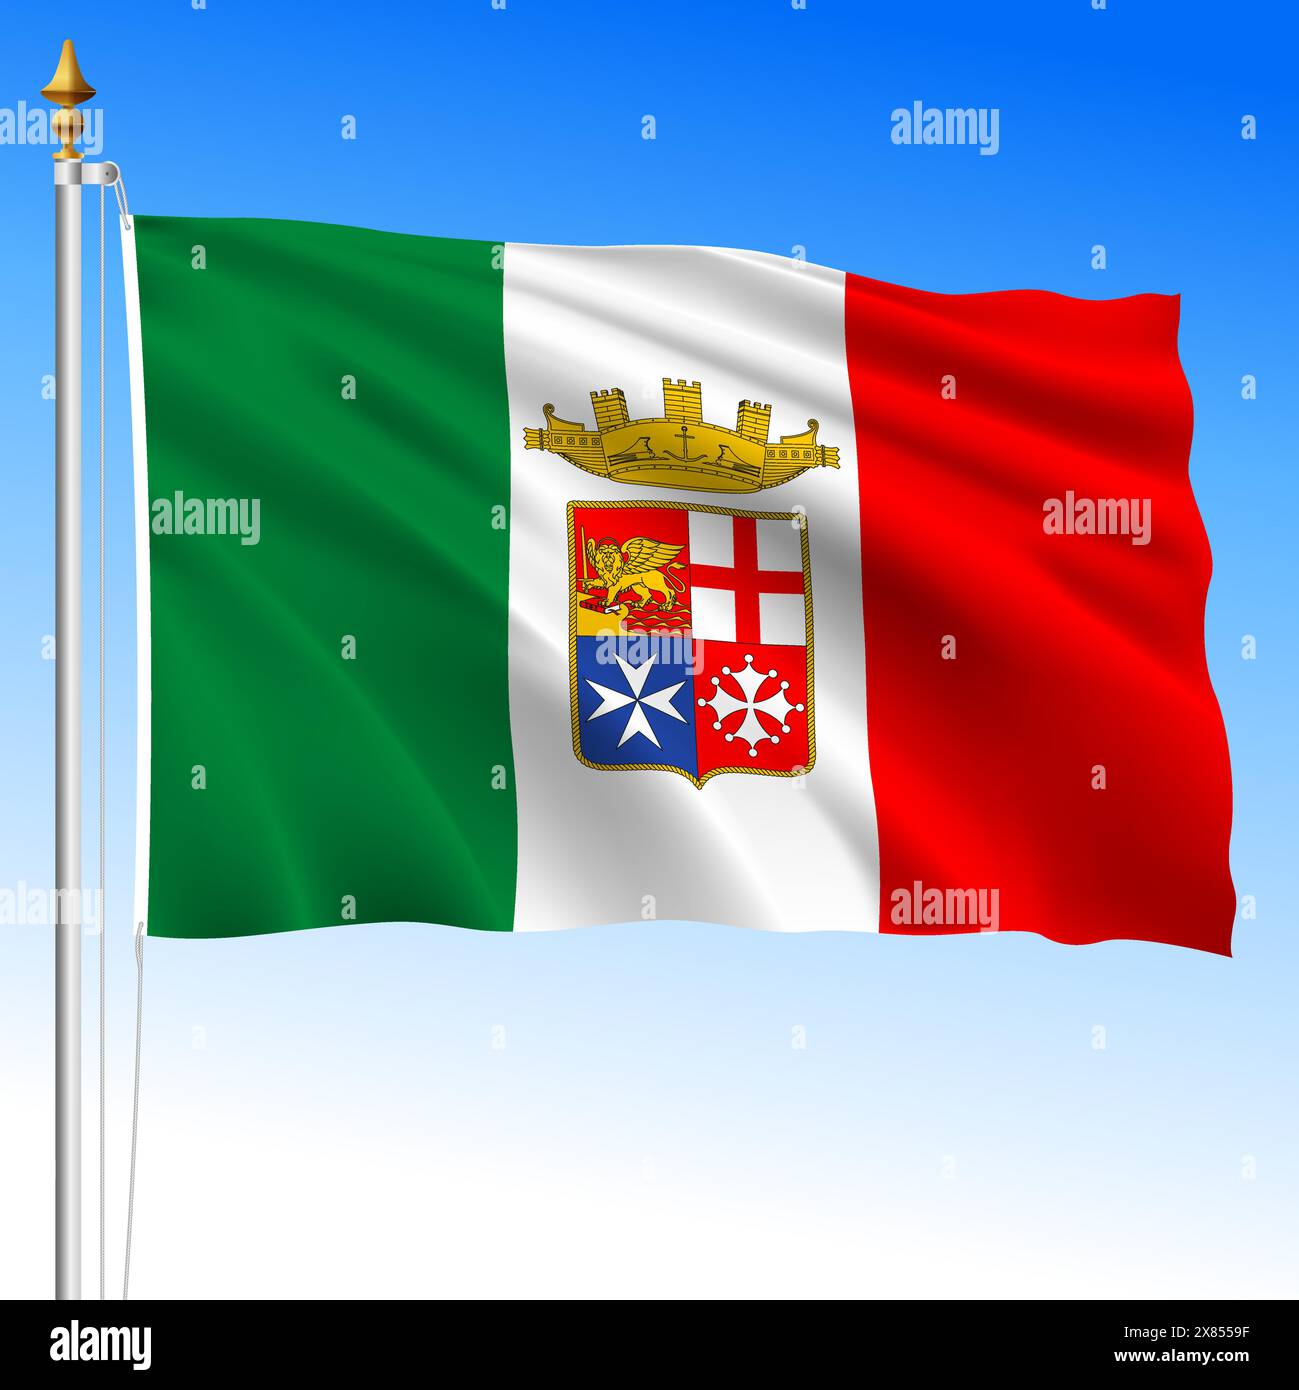 Italy, Italian Navy waving flag with coat of arms, vector illustration Stock Vector